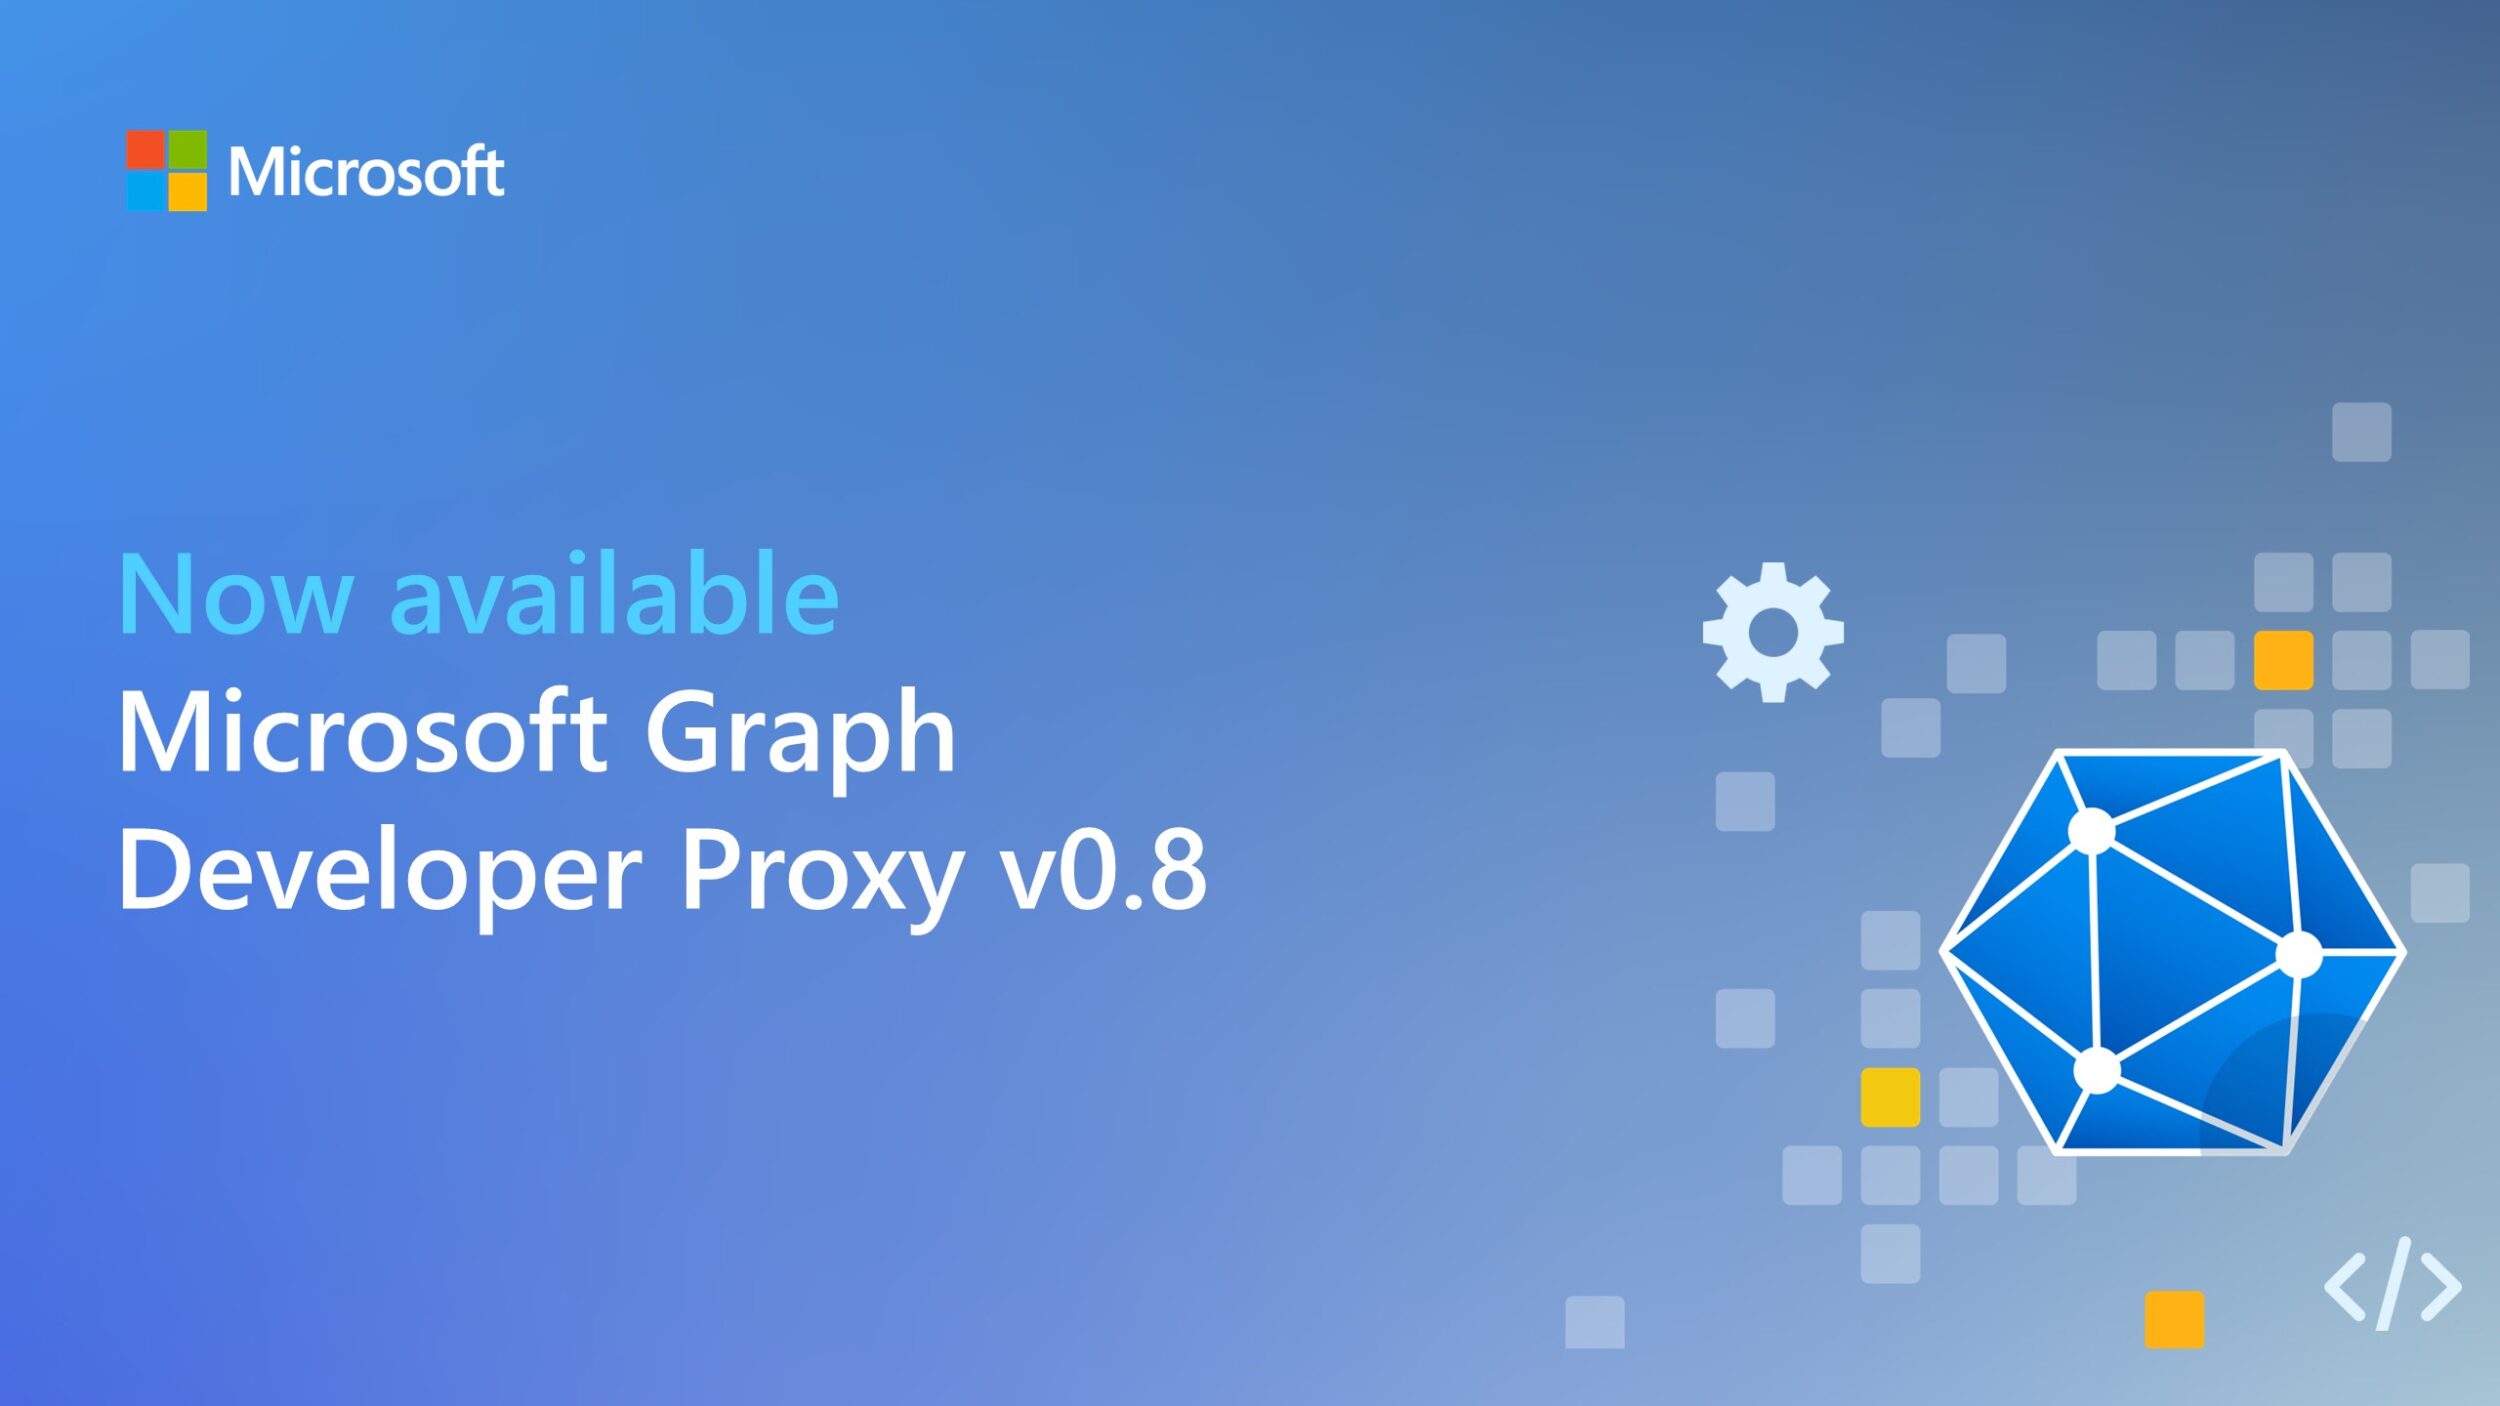 Microsoft Graph Developer Proxy v0.8 with minimal permissions detection and improved simulating throttling